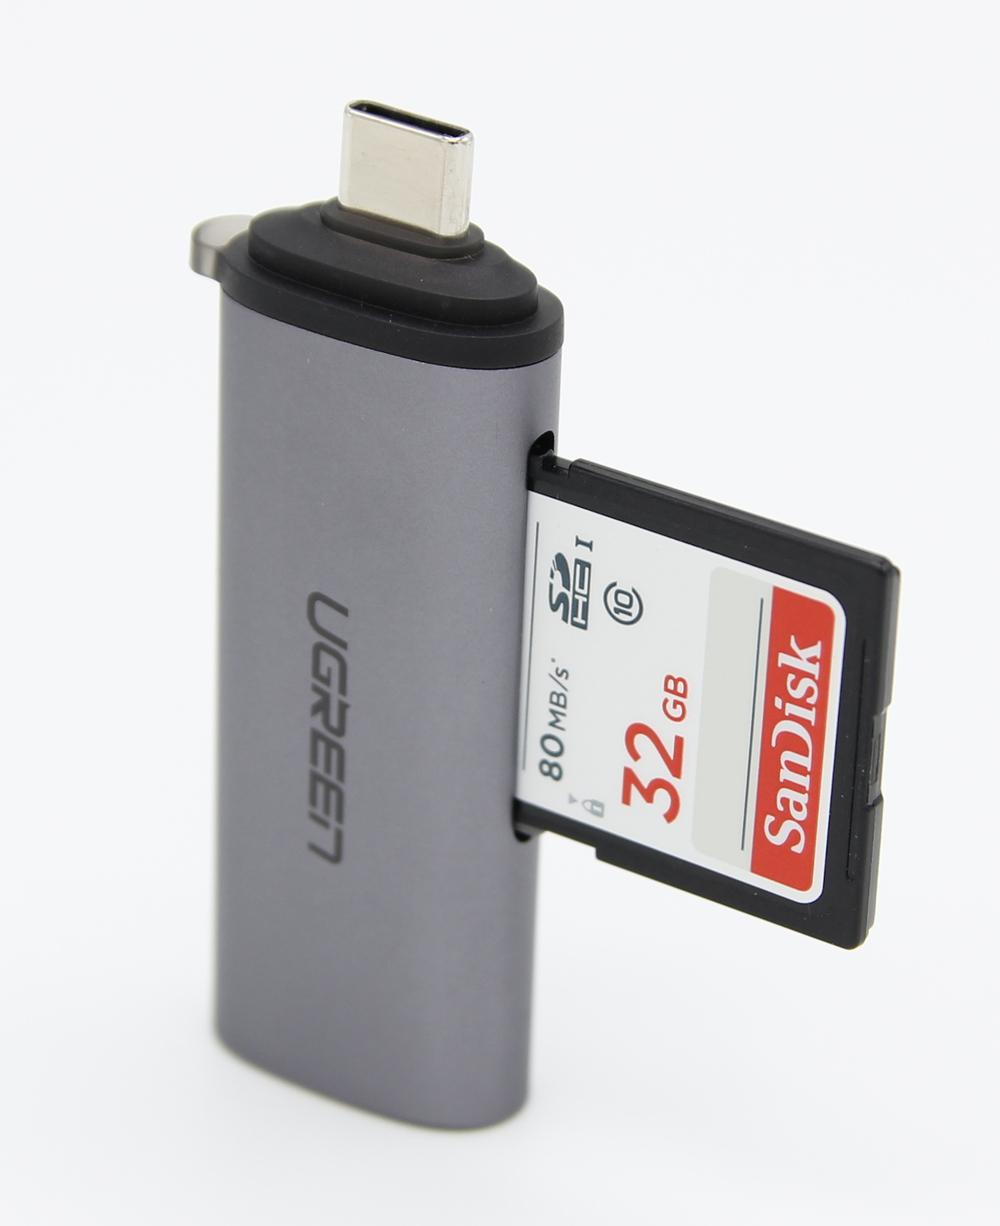  UGREEN USB-C SD/TF reader with a Sandisk SD card